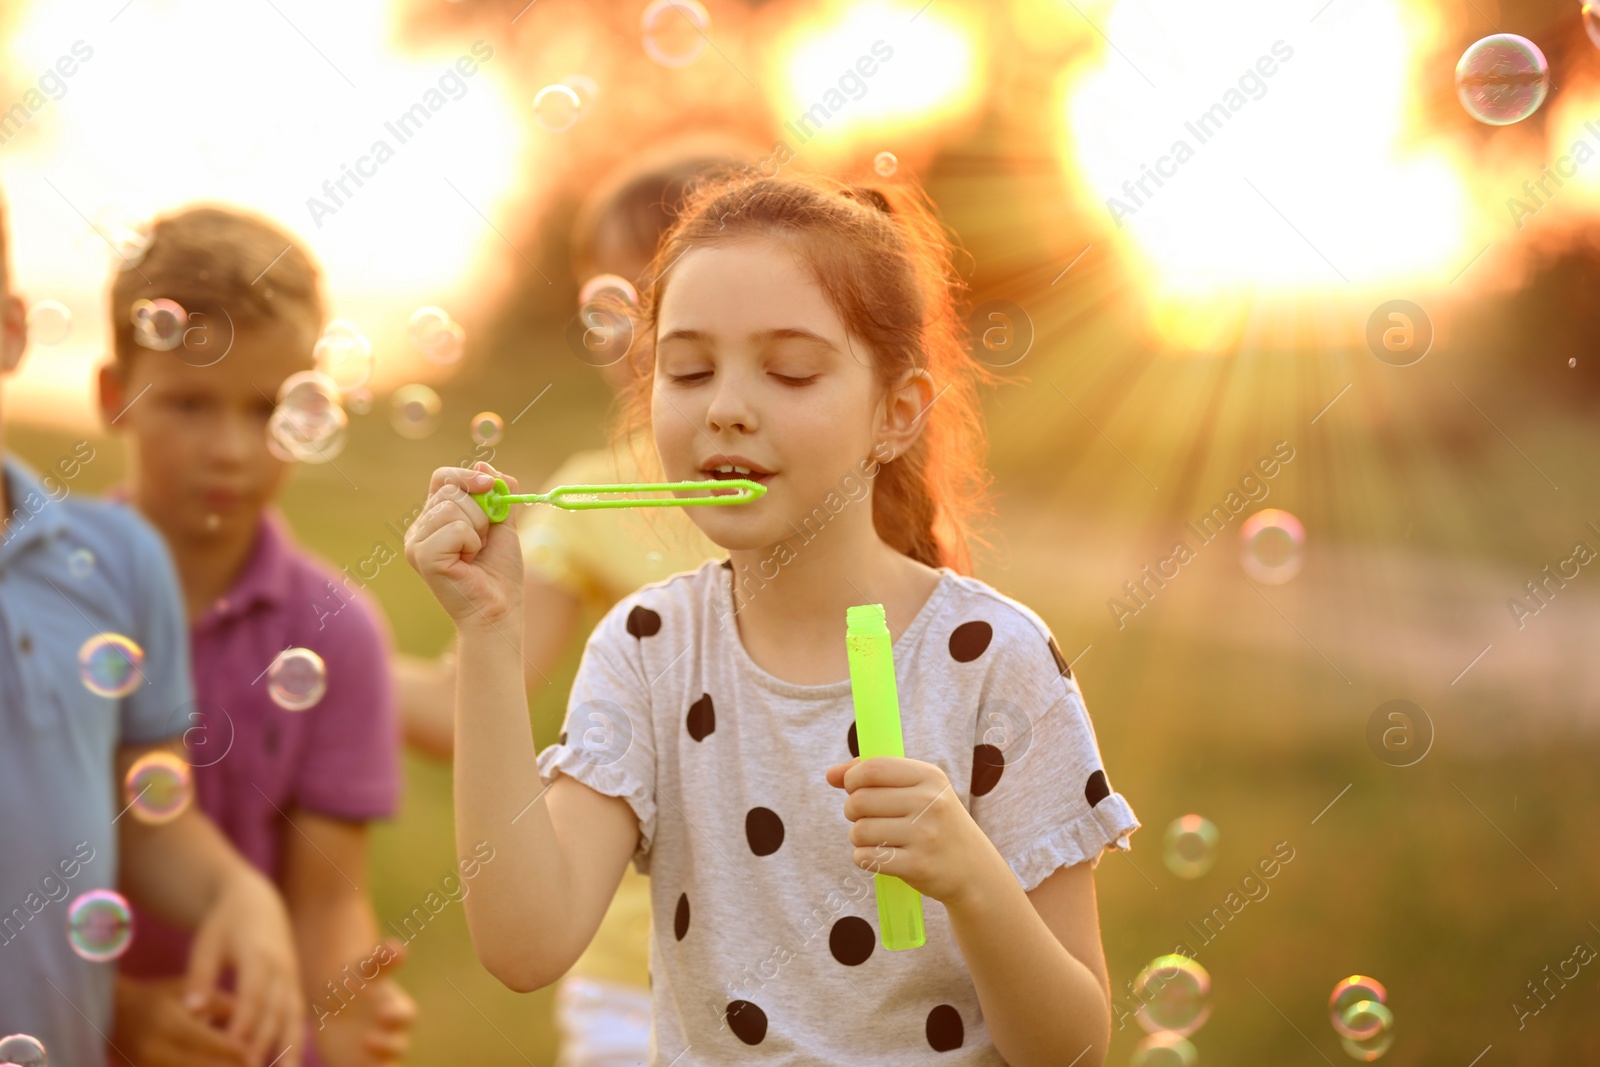 Image of Cute little girl blowing soap bubbles outdoors at sunset